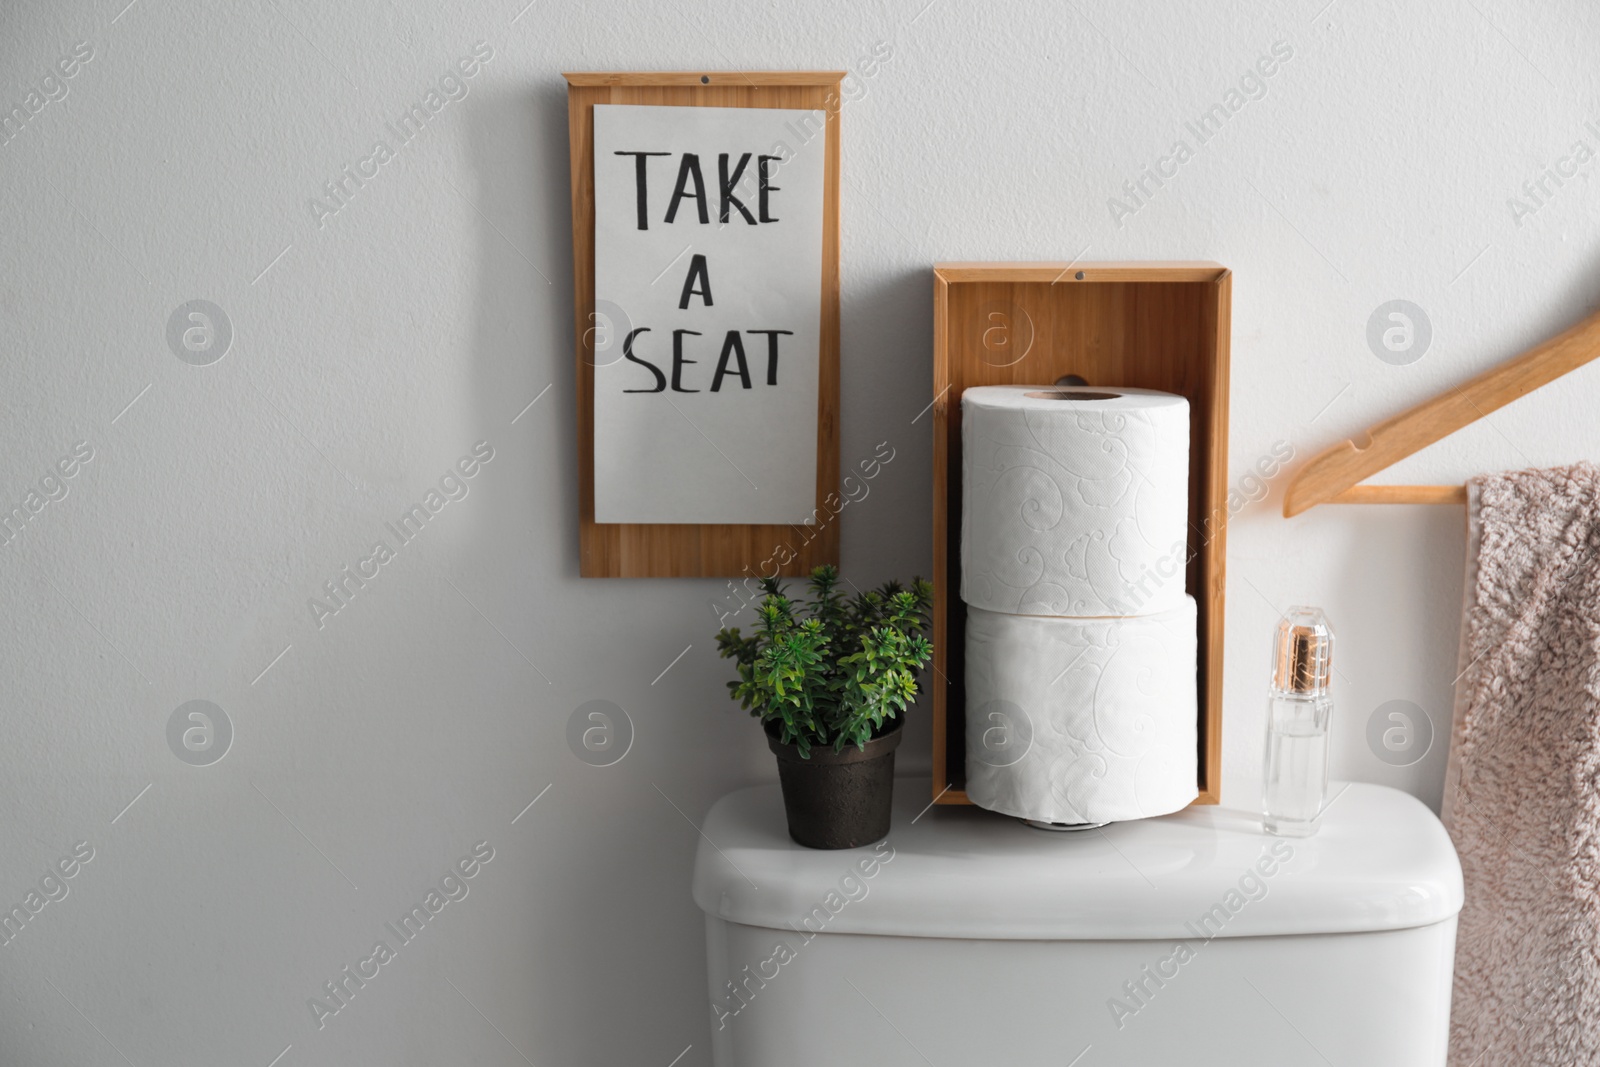 Photo of Decor elements, necessities and toilet bowl near white wall, space for text. Bathroom interior